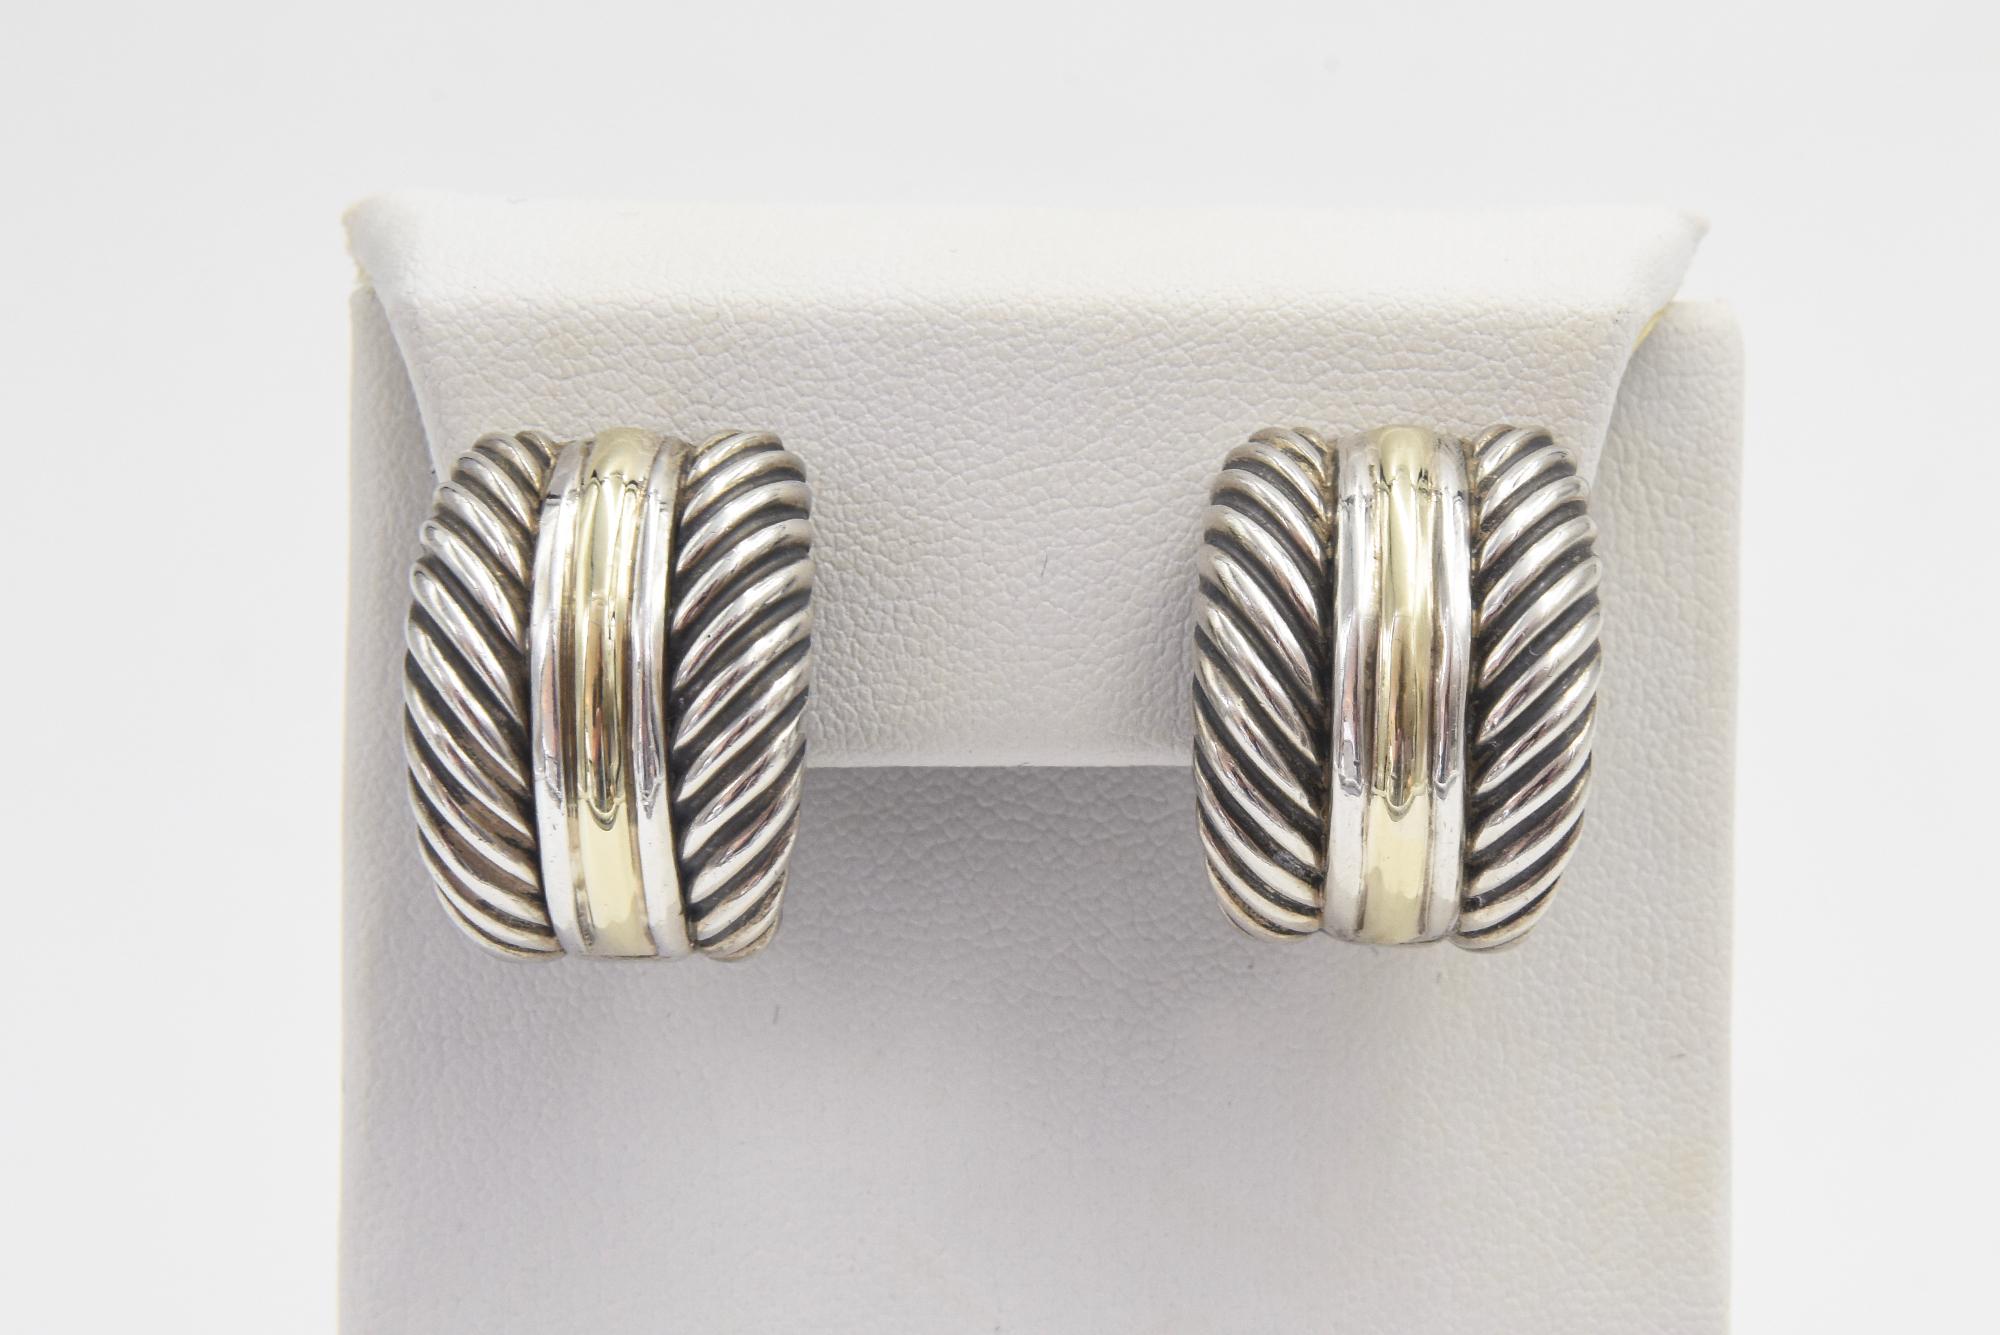 David Yurman cable hoop earring featuring a 14k yellow gold line running between 2 sterling silver lines set between 2 cable sections. Marked D. Yurman 14k Sterling on the back.  